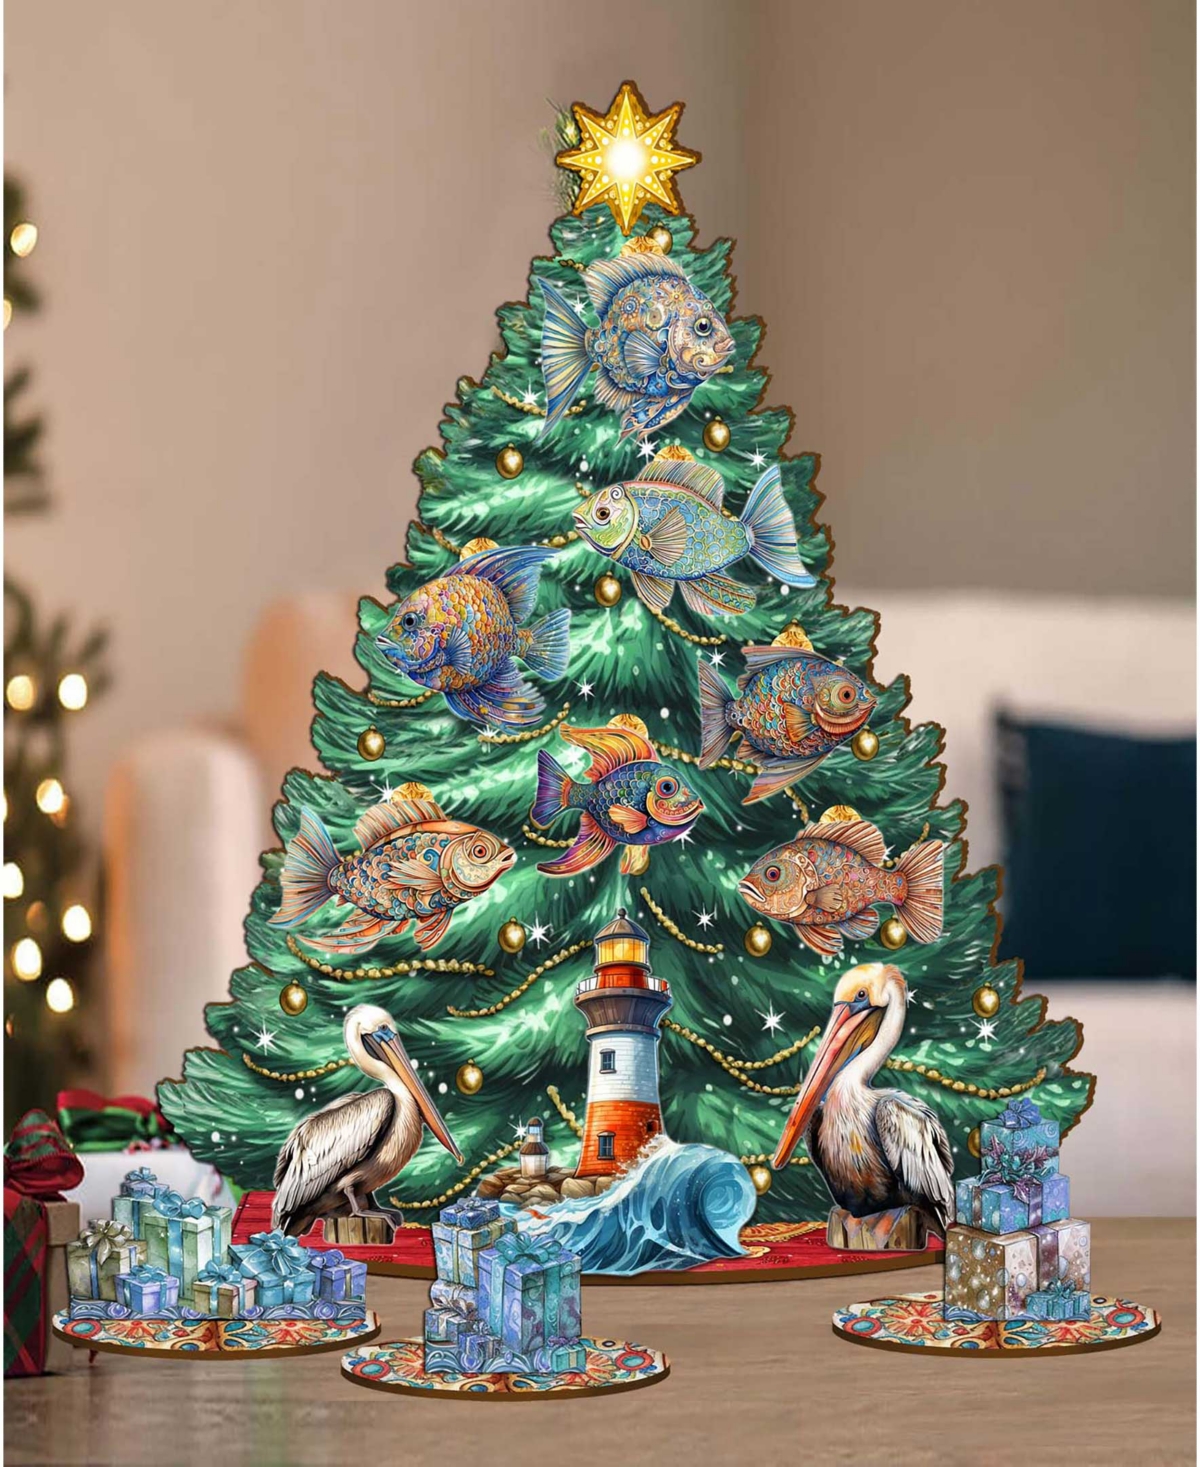 Shop Designocracy Coastal Themed Wooden Christmas Tree With Ornaments Set Of 13 G. Debrekht In Multi Color